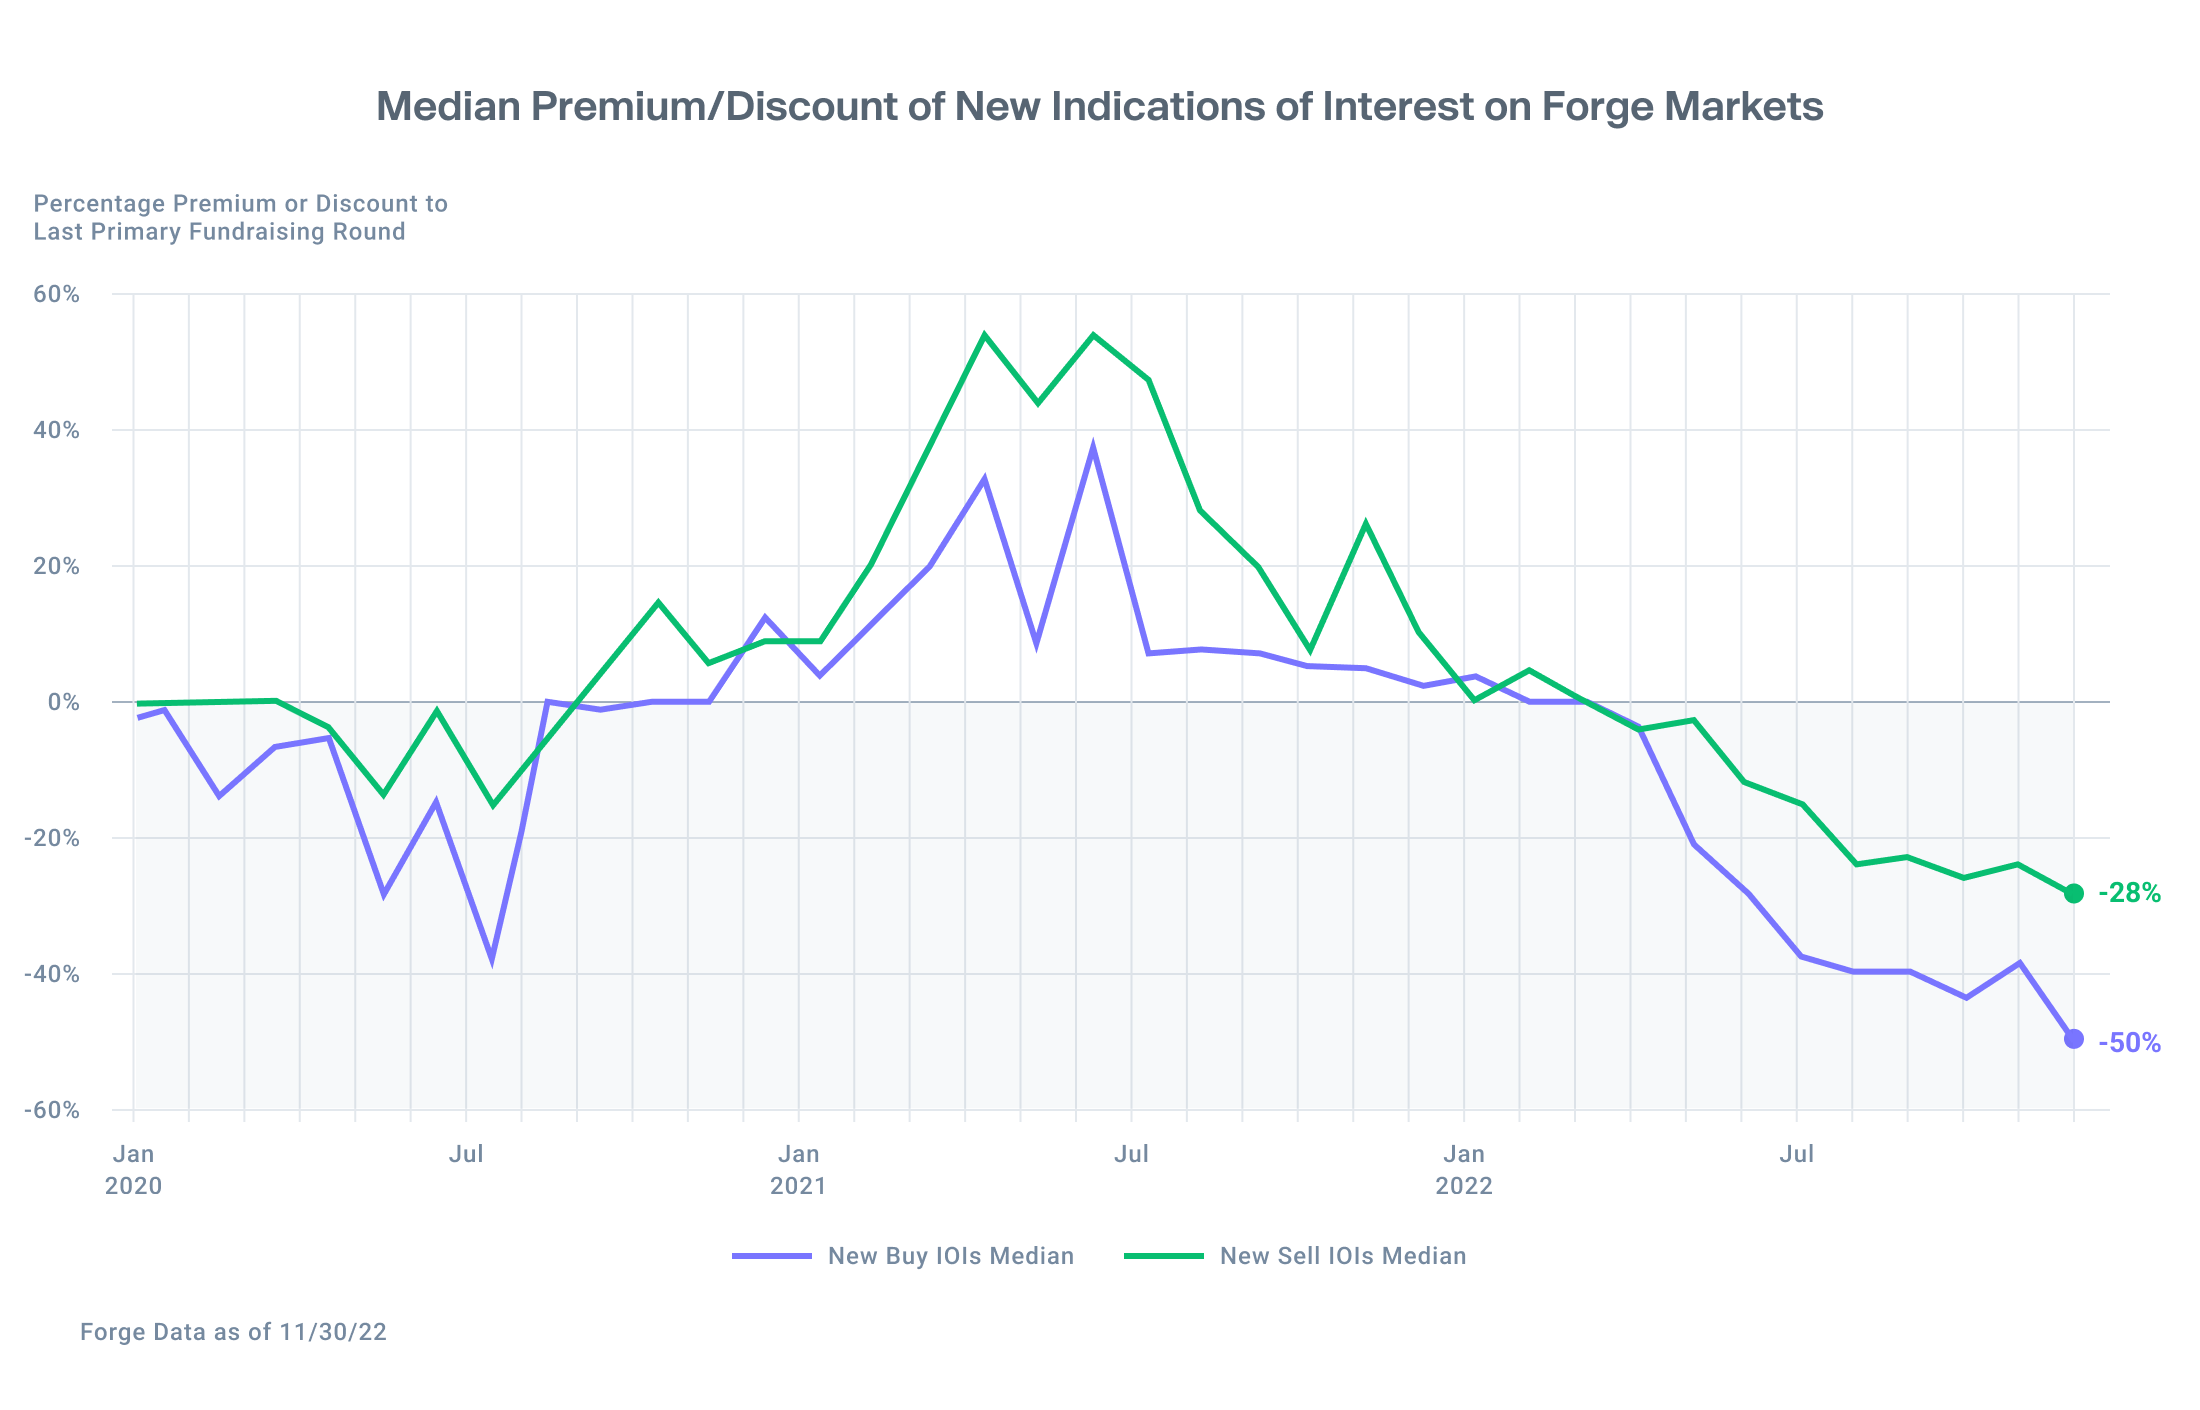 Line chart showing the trending gap of median discount between new buy and sell IOI since January 2020 on Forge Markets